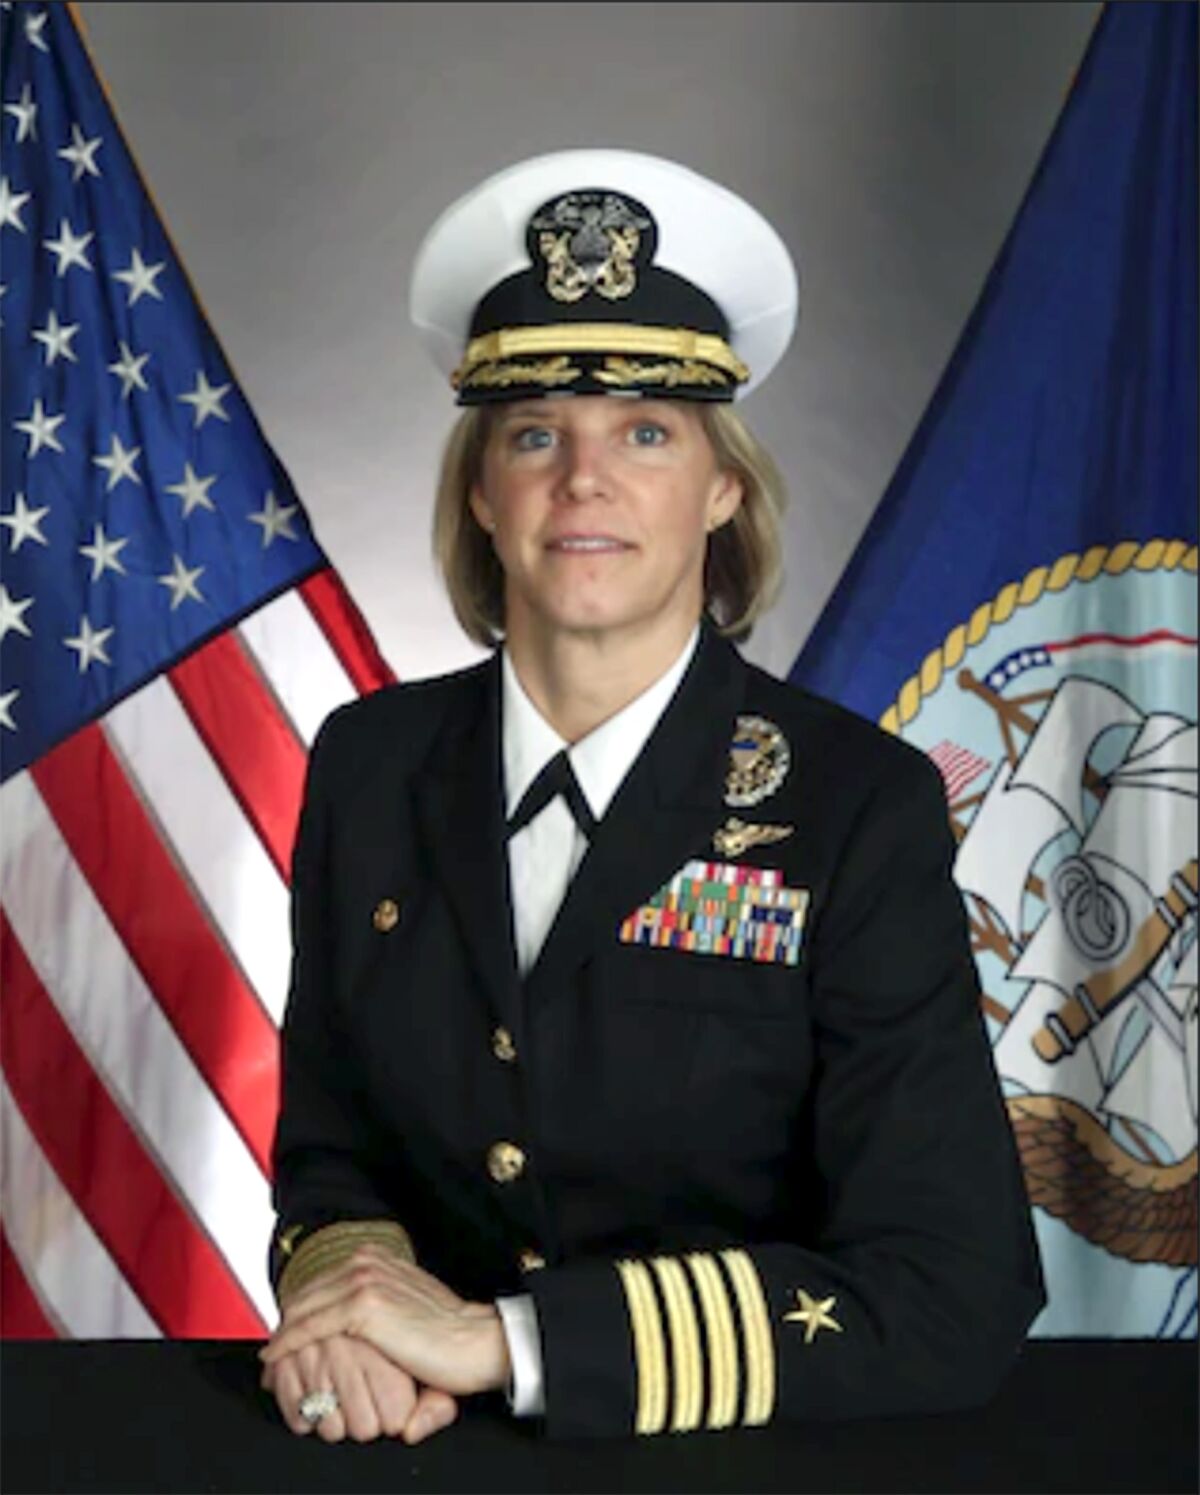 Capt. Amy Bauernschmidt will take command of the USS Abraham Lincoln this summer.